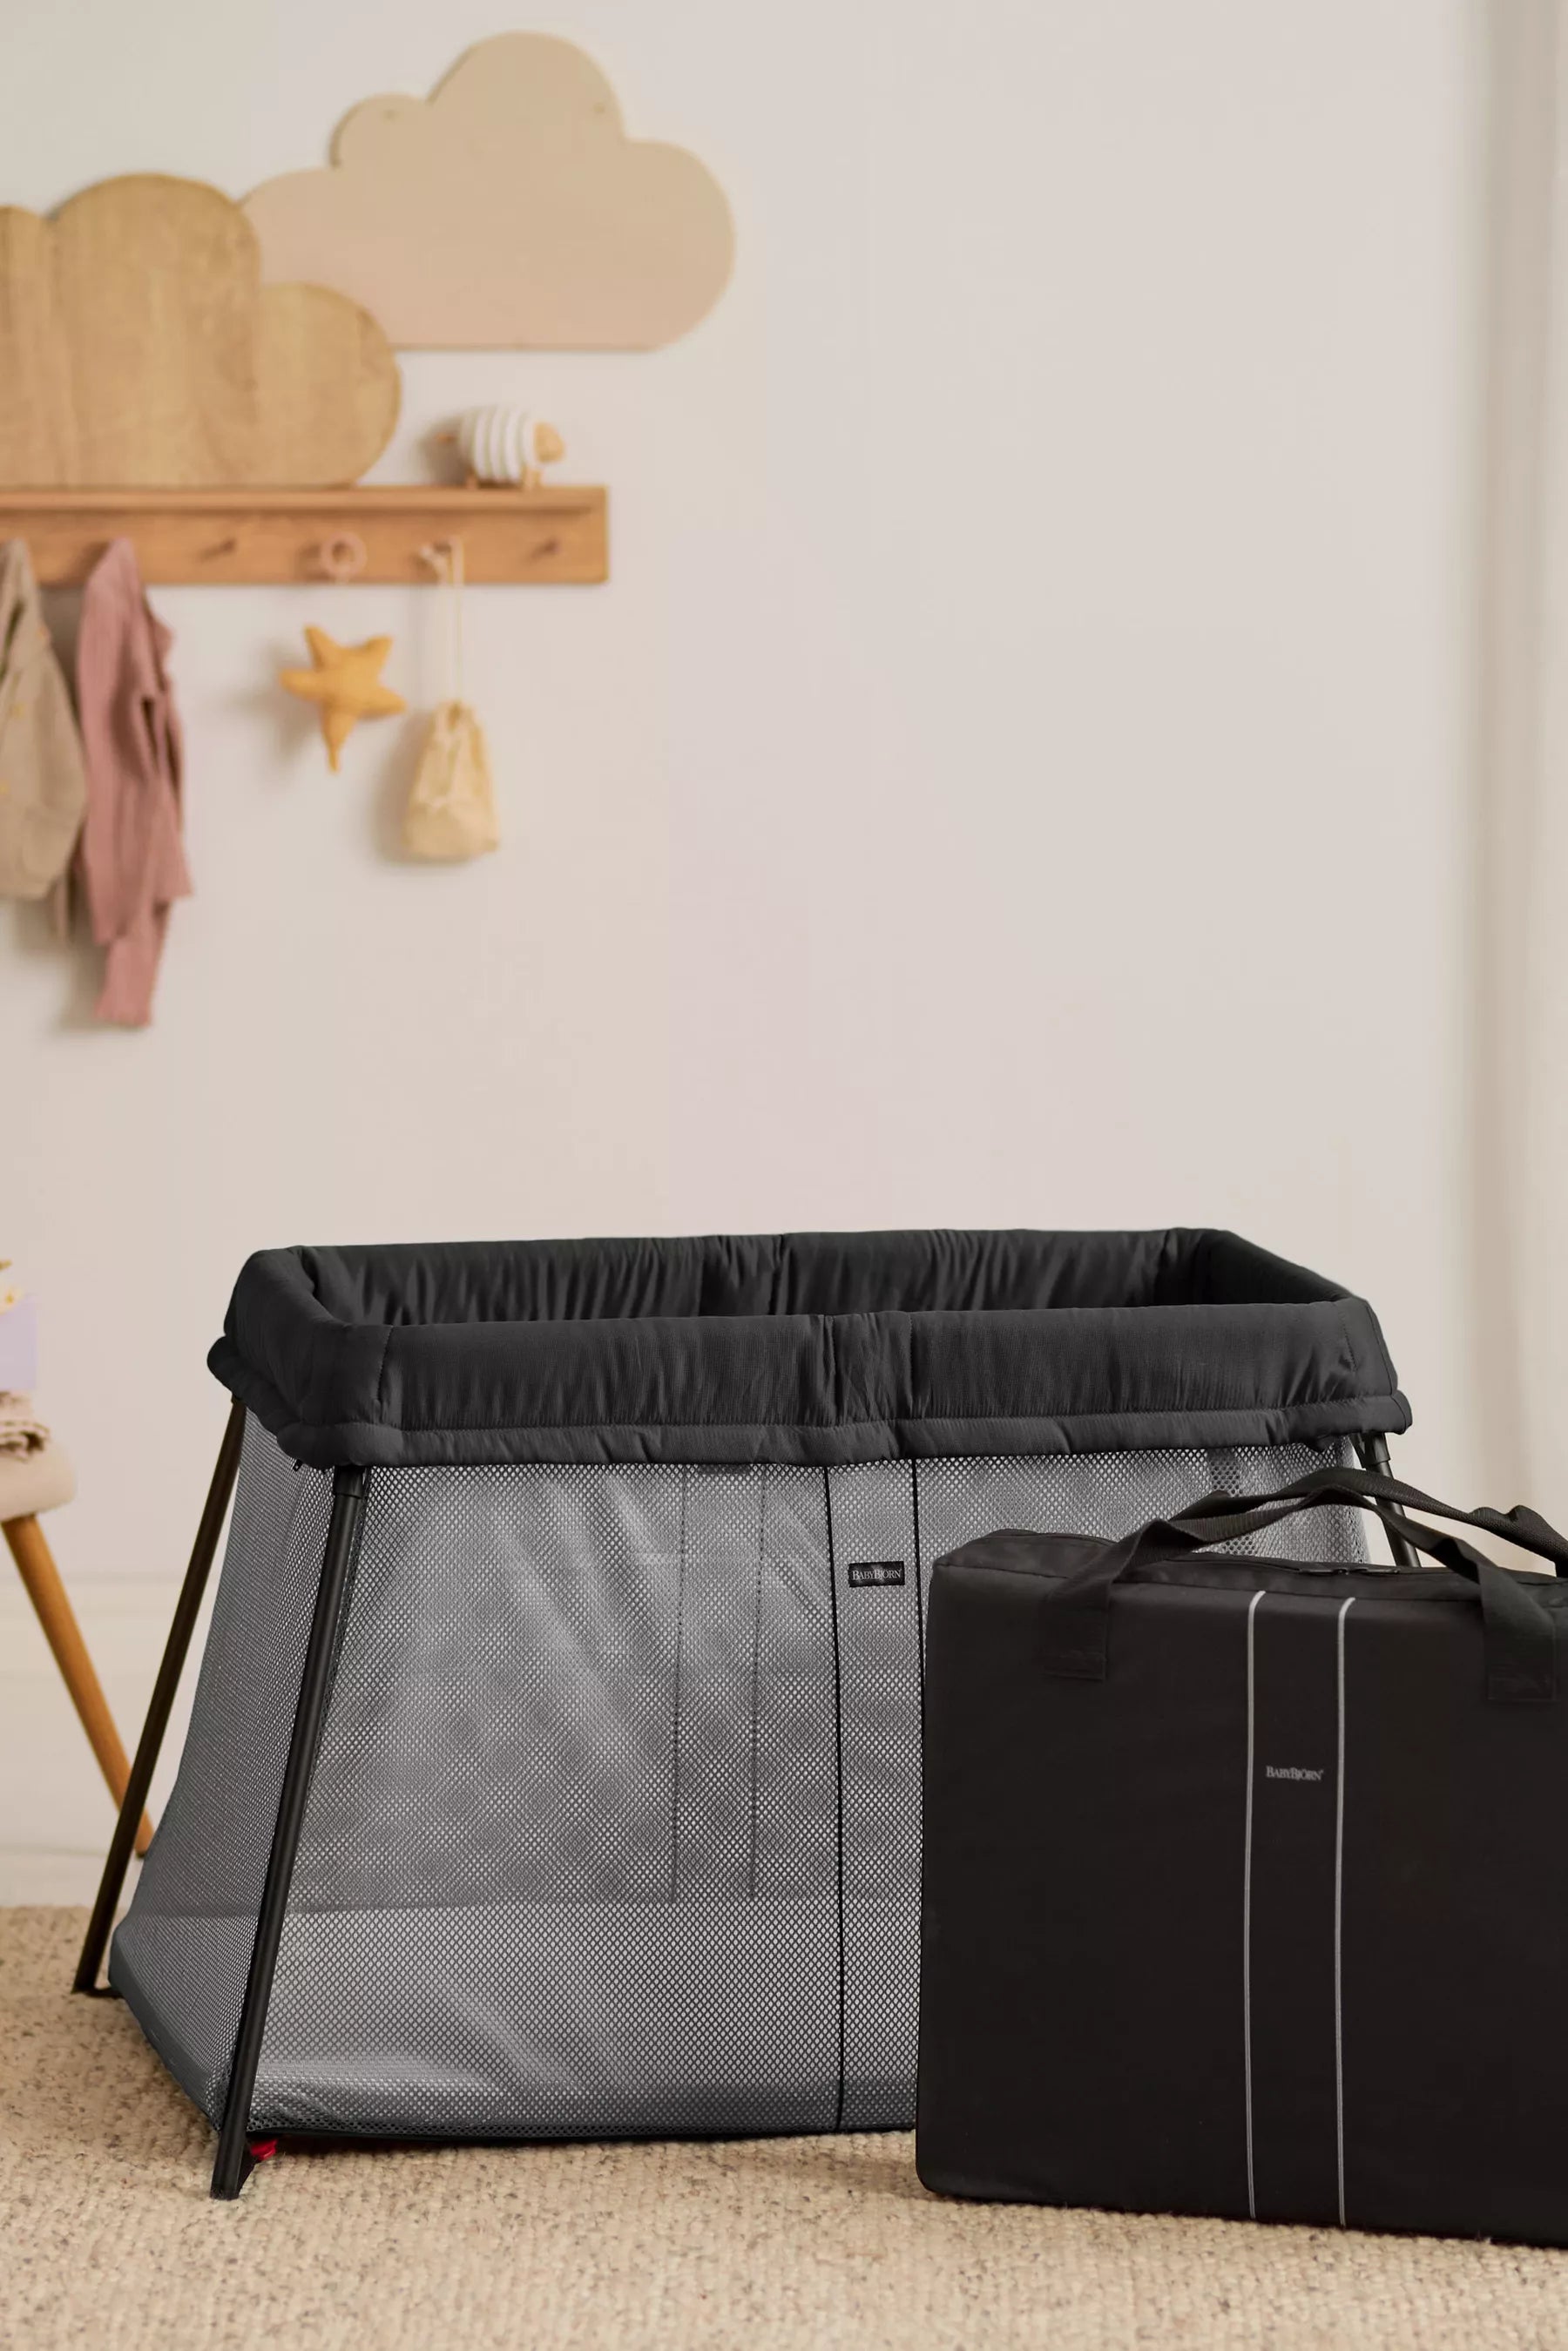 BabyBjorn Travel Crib Light in Black with Fitted Sheet